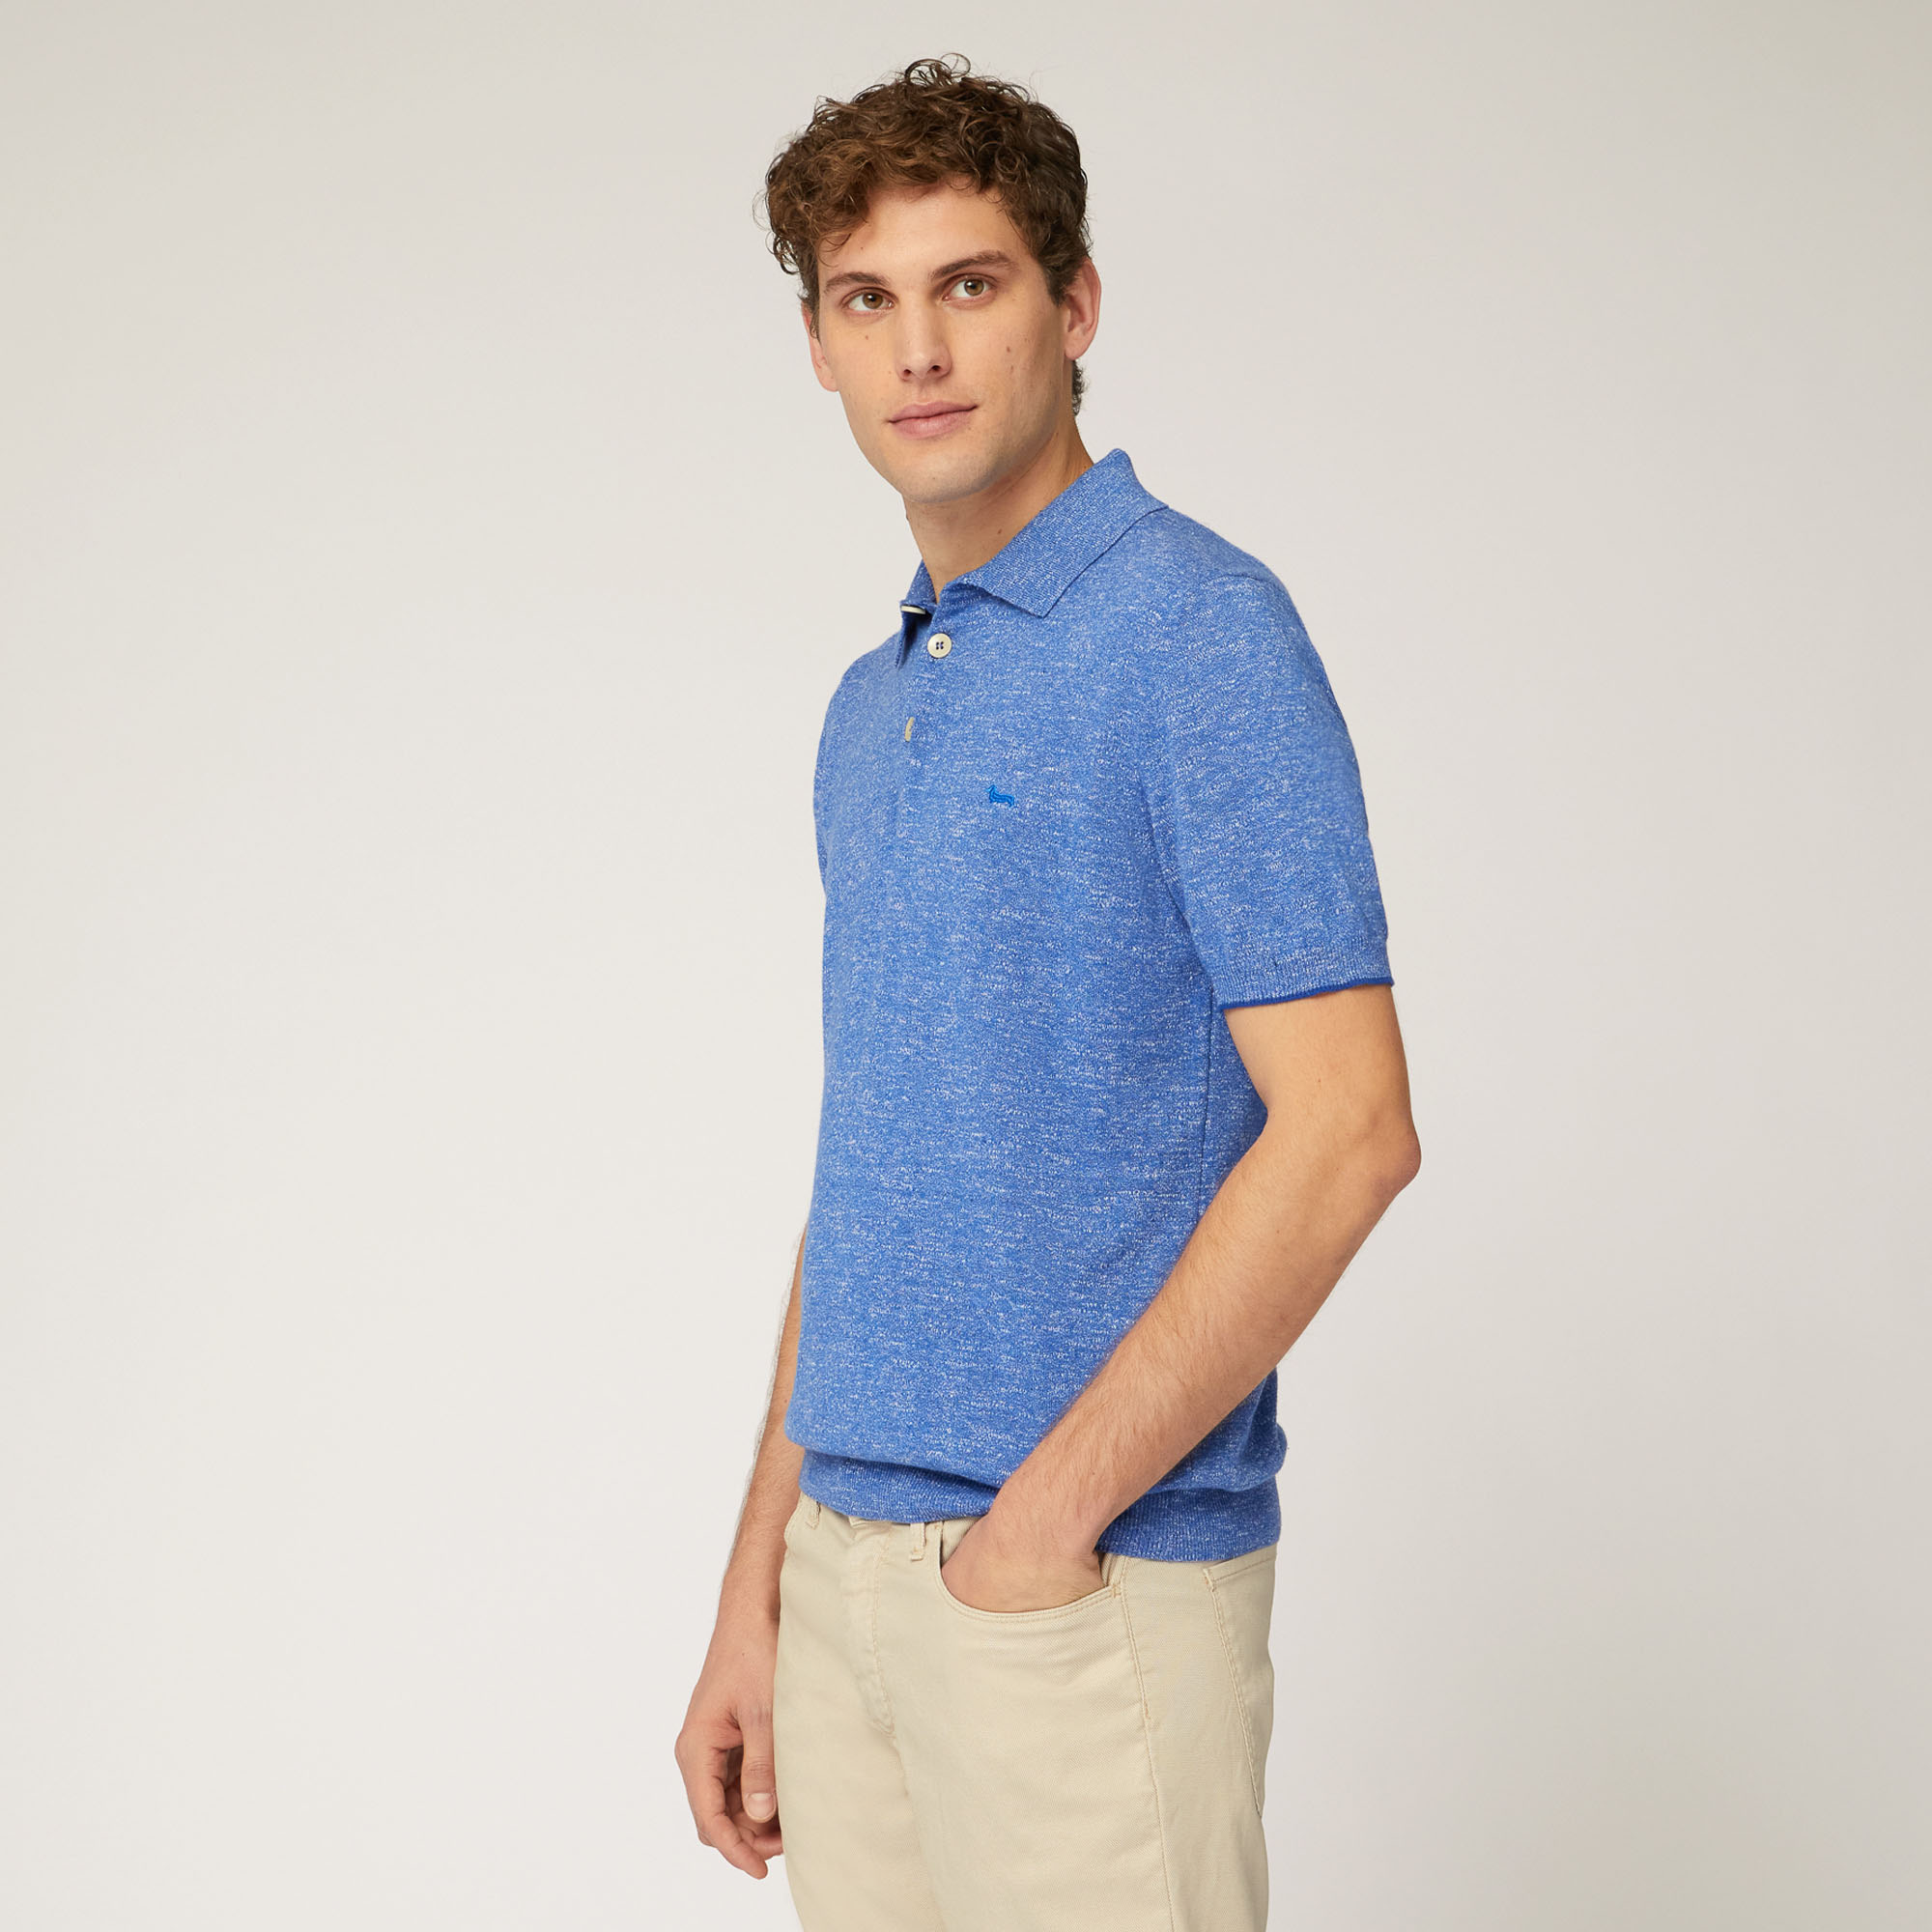 Cotton and Linen Tweed Polo